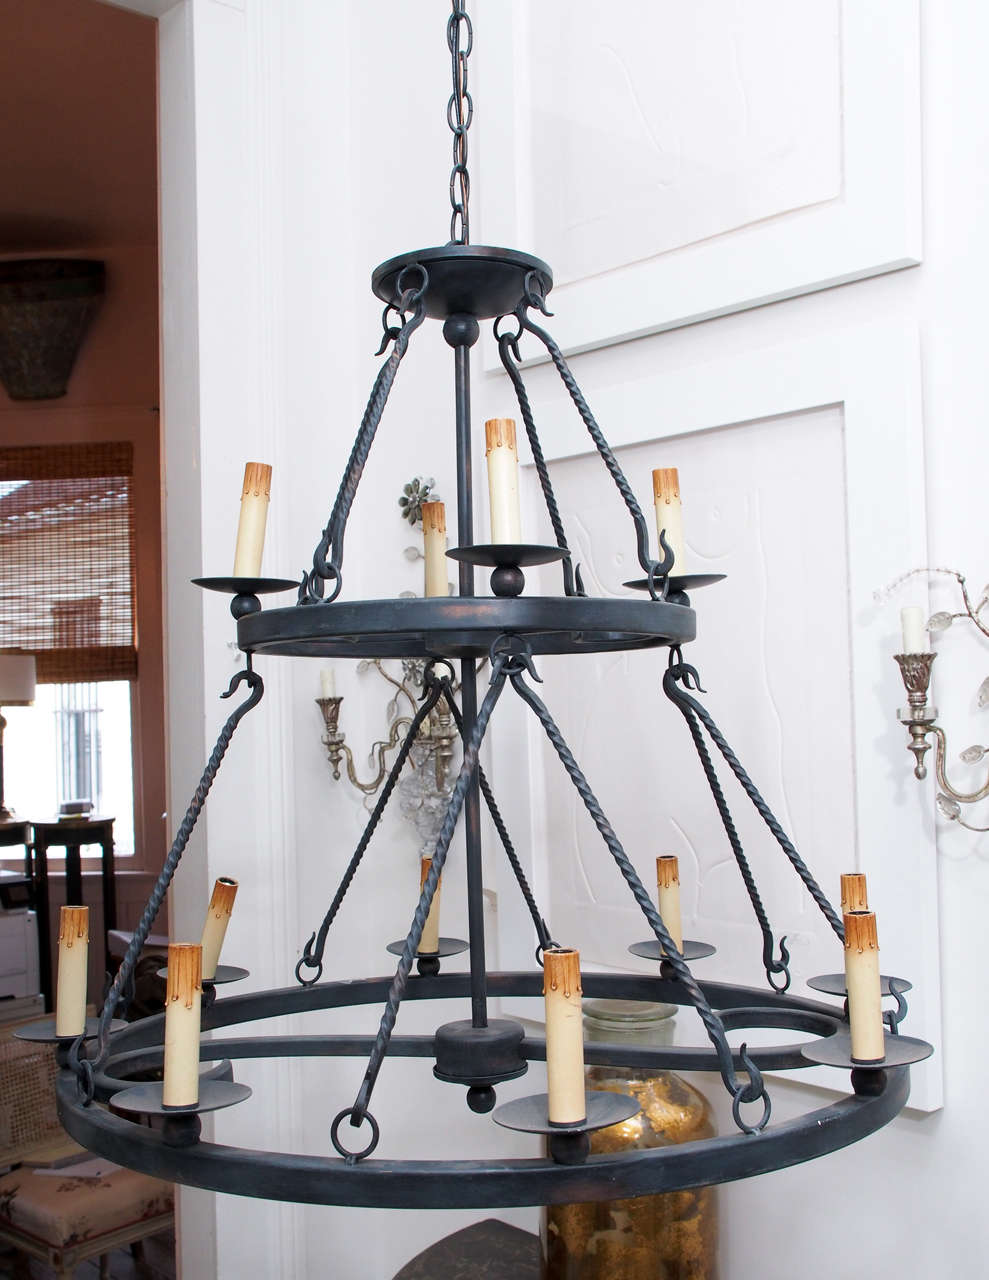 These black wrought iron chandeliers are a reproduction of an antique. Consists of two circles, the top being smaller than the bottom, giving it a cone shape.  On the top of the bottom tier, there are 8 candles that screw in lightbulbs fit into. The